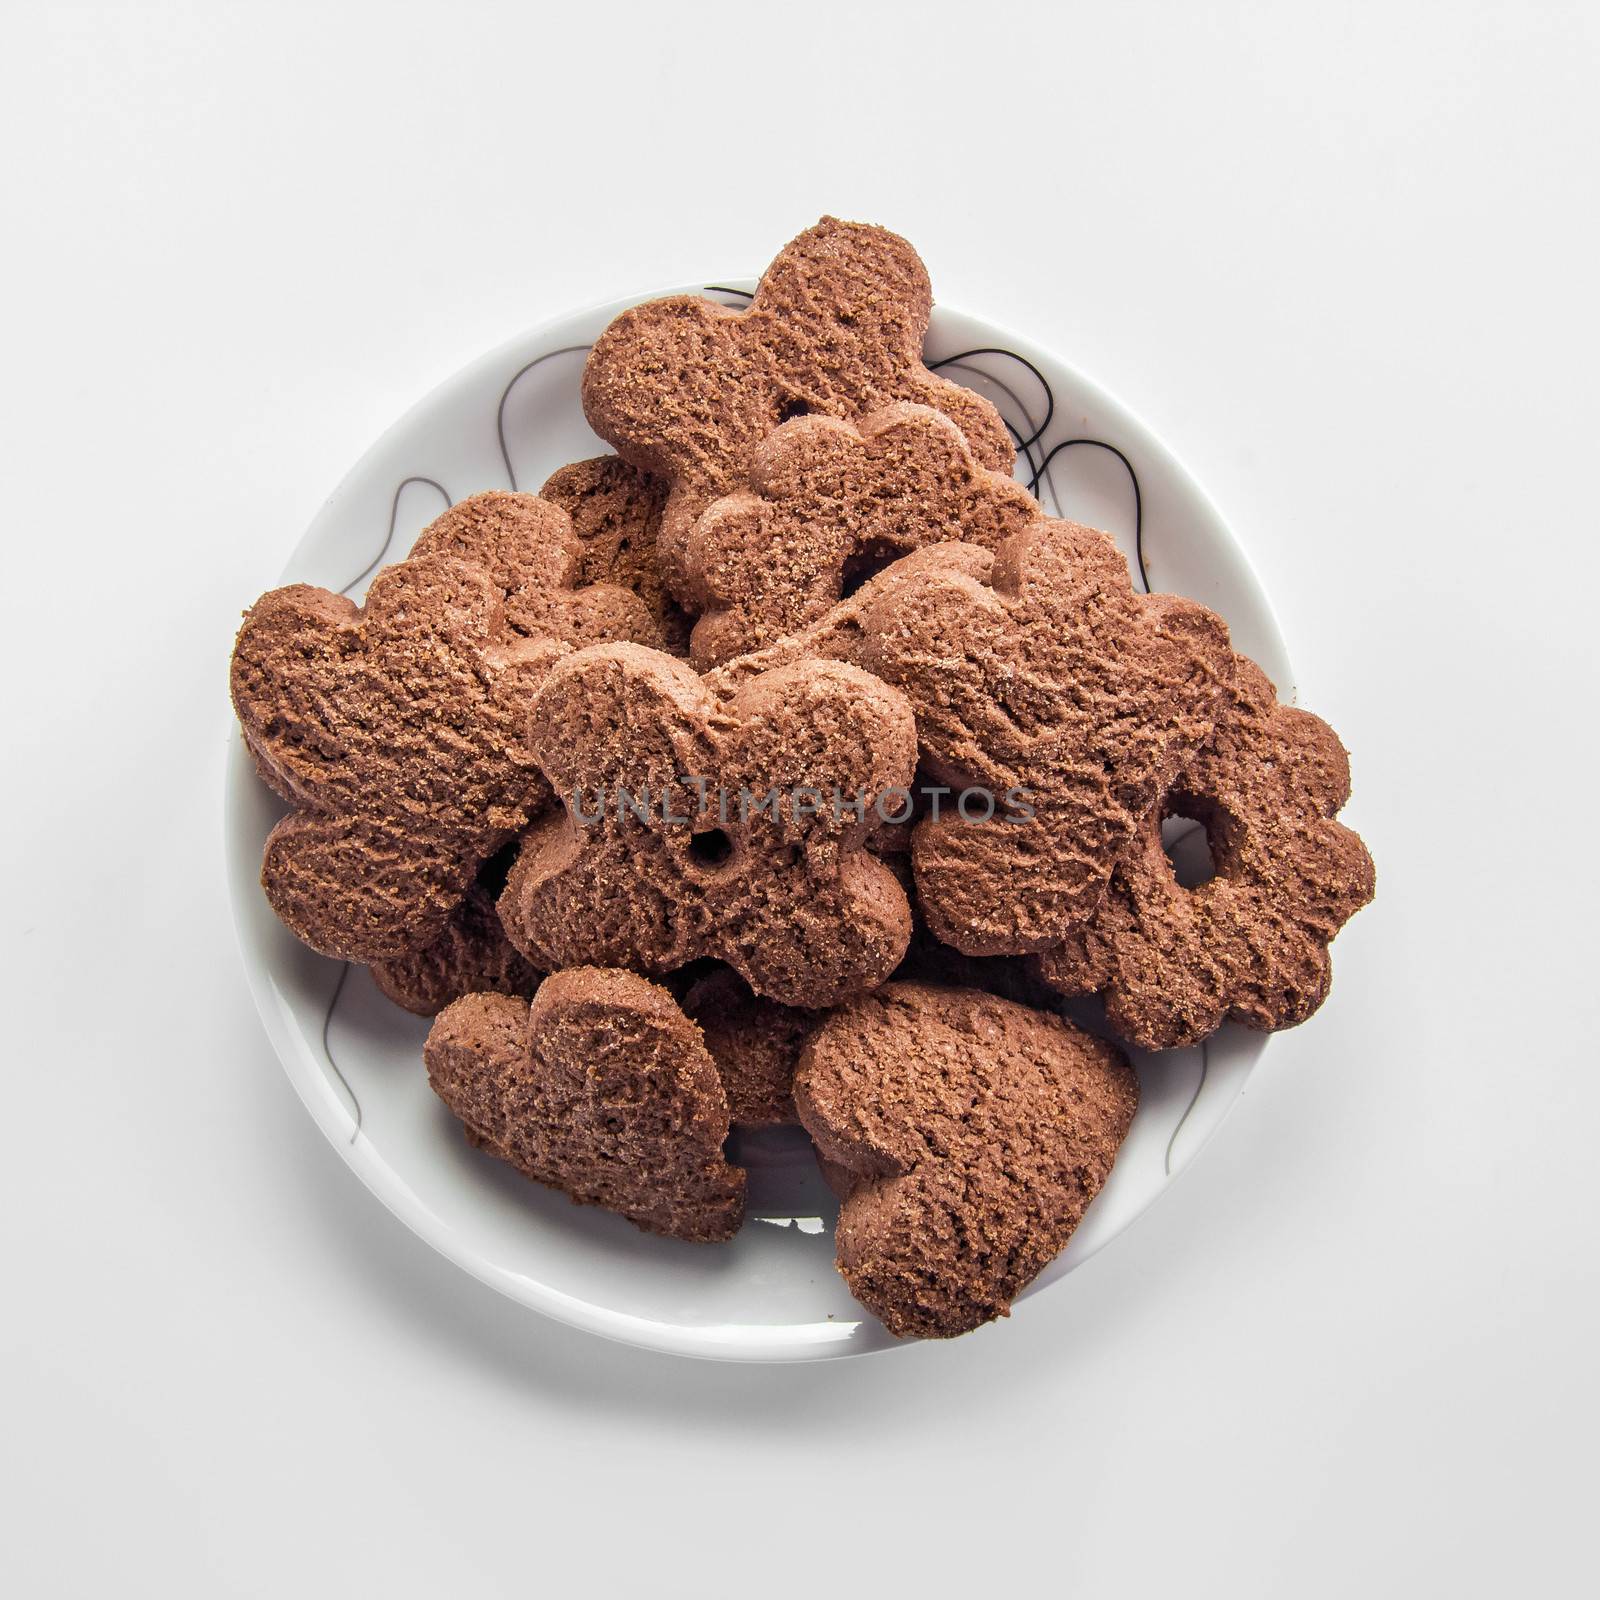 Chocolate cookies on dish by dynamicfoto